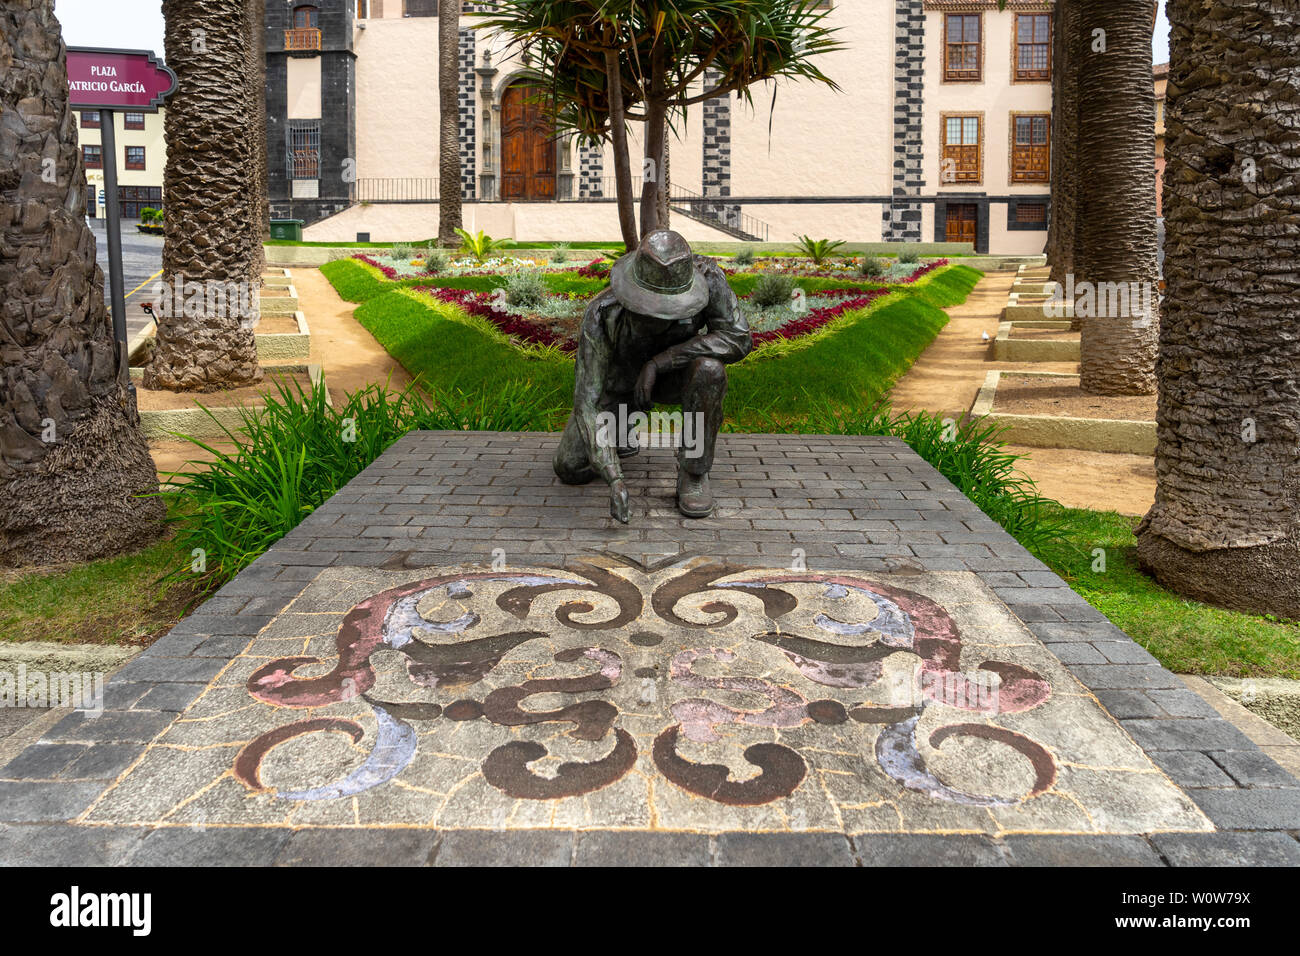 LA OROTAVA, TENERIFE, CANARY ISLANDS, SPAIN - JULY 25, 2018: A monument to the makers of sand and flower carpets (Homenaje al Alfombrista) by author Juan Carlos Armas Peraza. Stock Photo